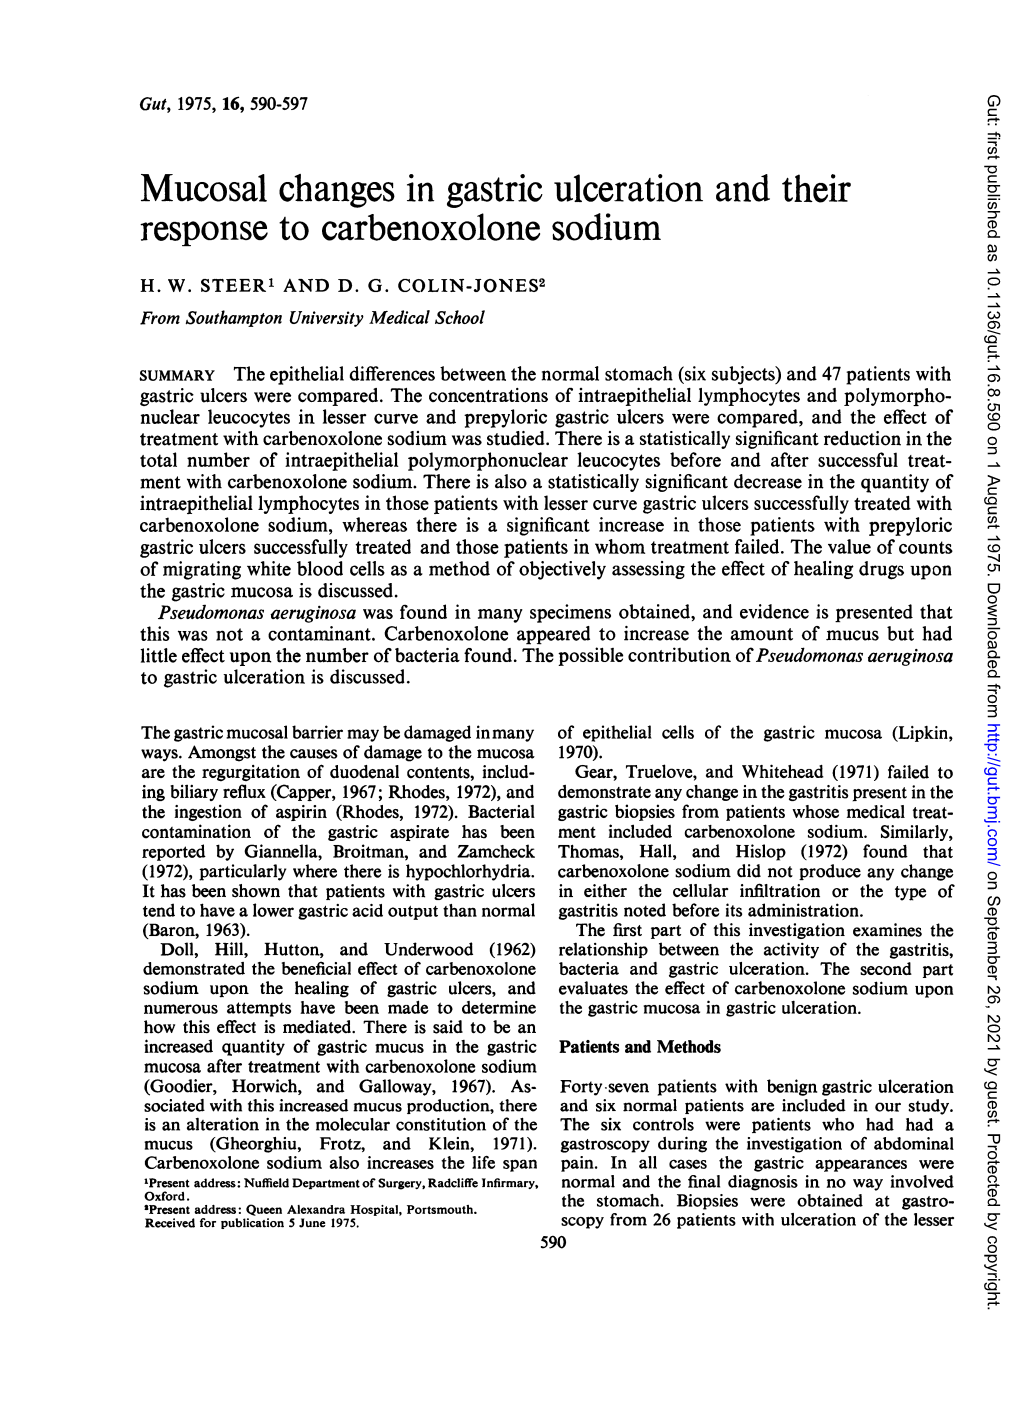 Mucosal Changes in Gastric Ulceration and Their Response to Carbenoxolone Sodium